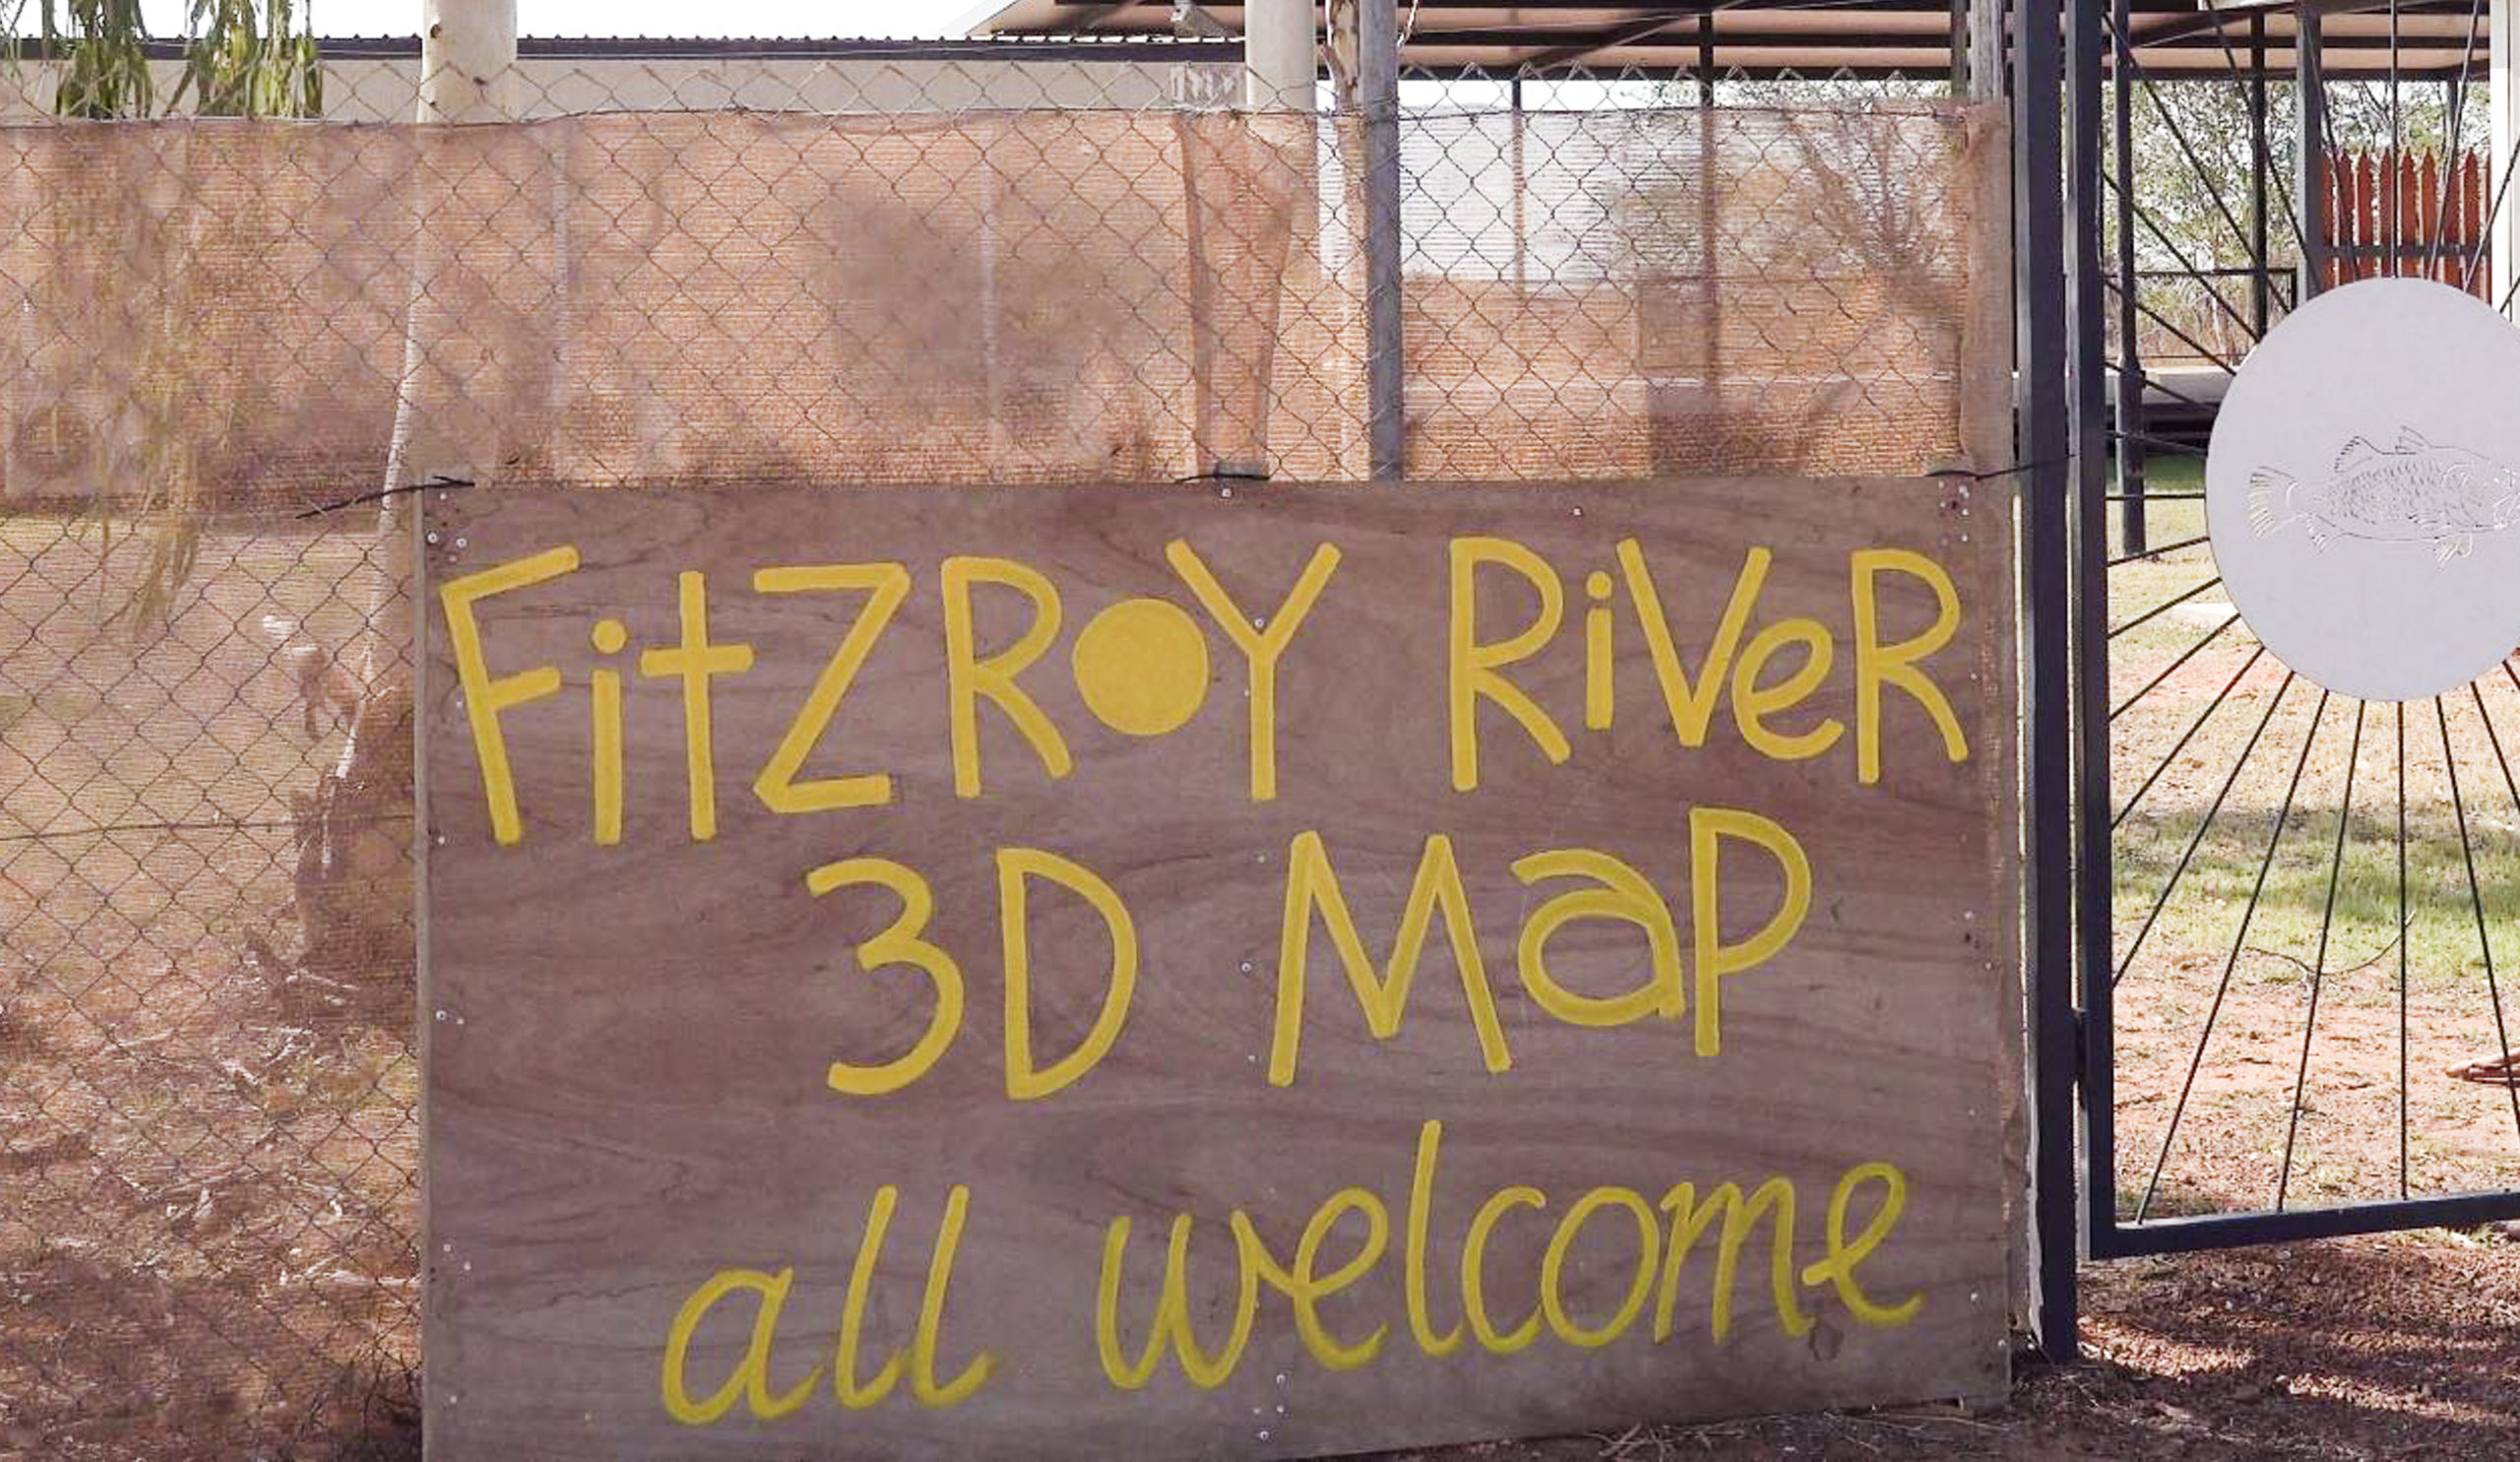 Fitzroy river 3D map welcome sign photo